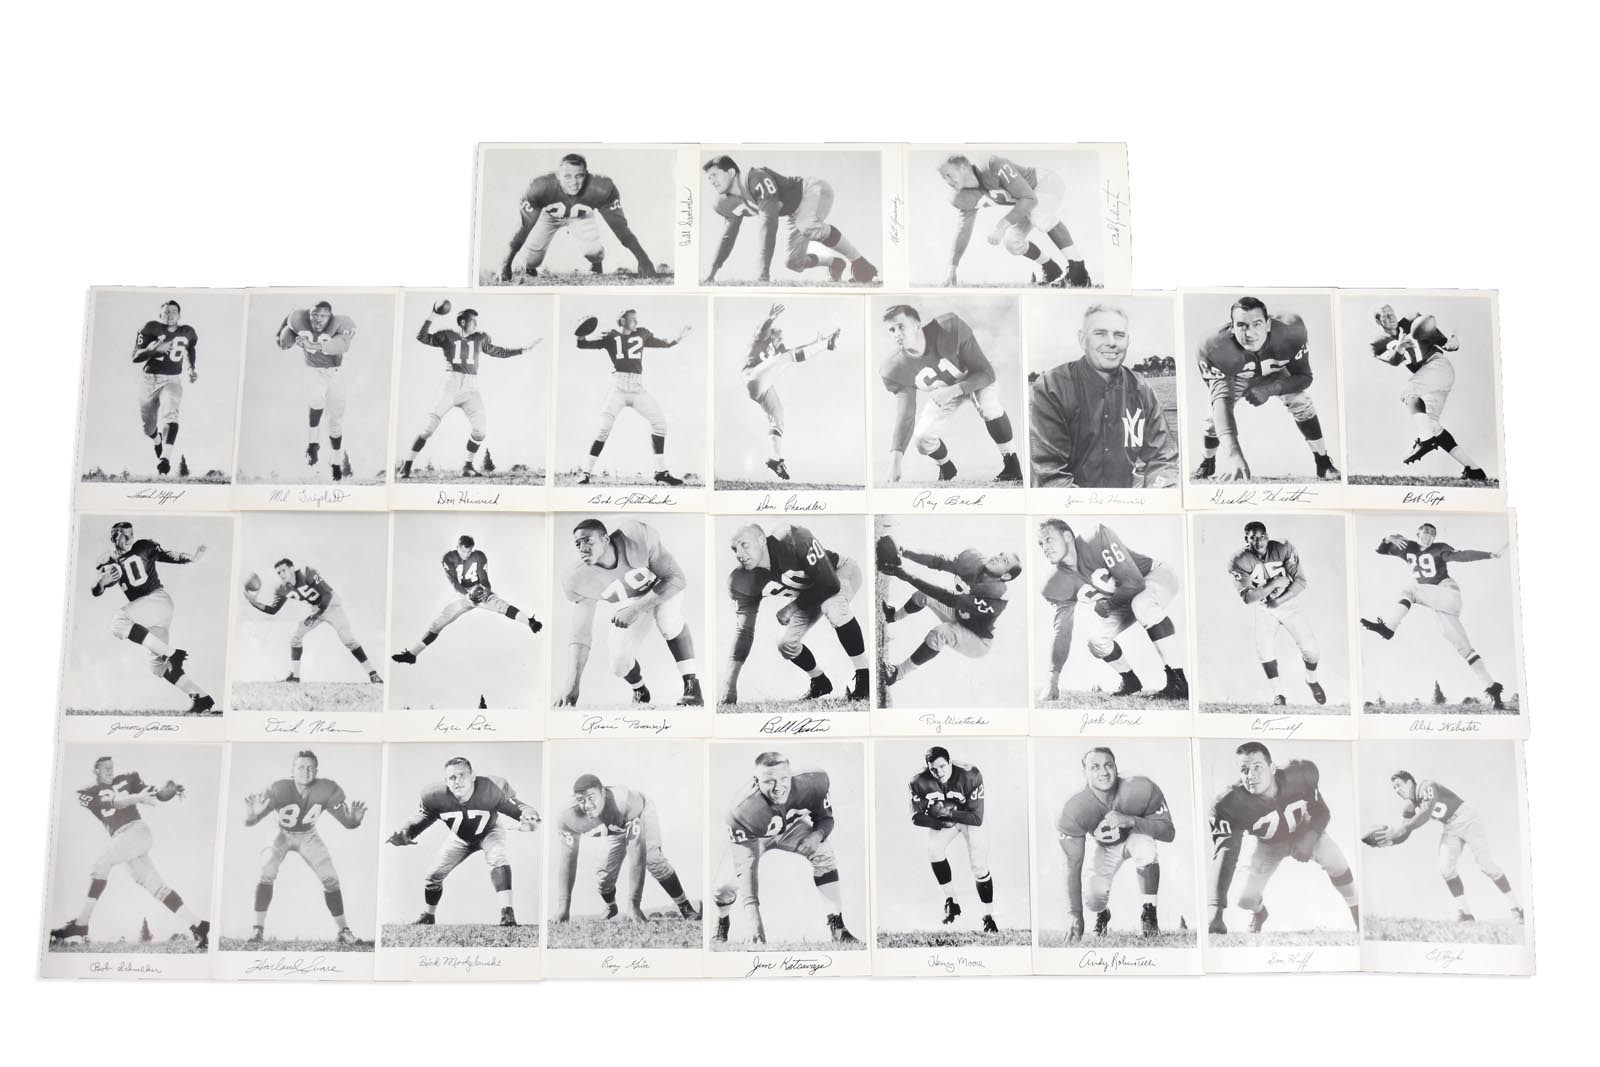 Rare 1956 New York Giants Football Picture Pack (Ken MacAfee Collection)